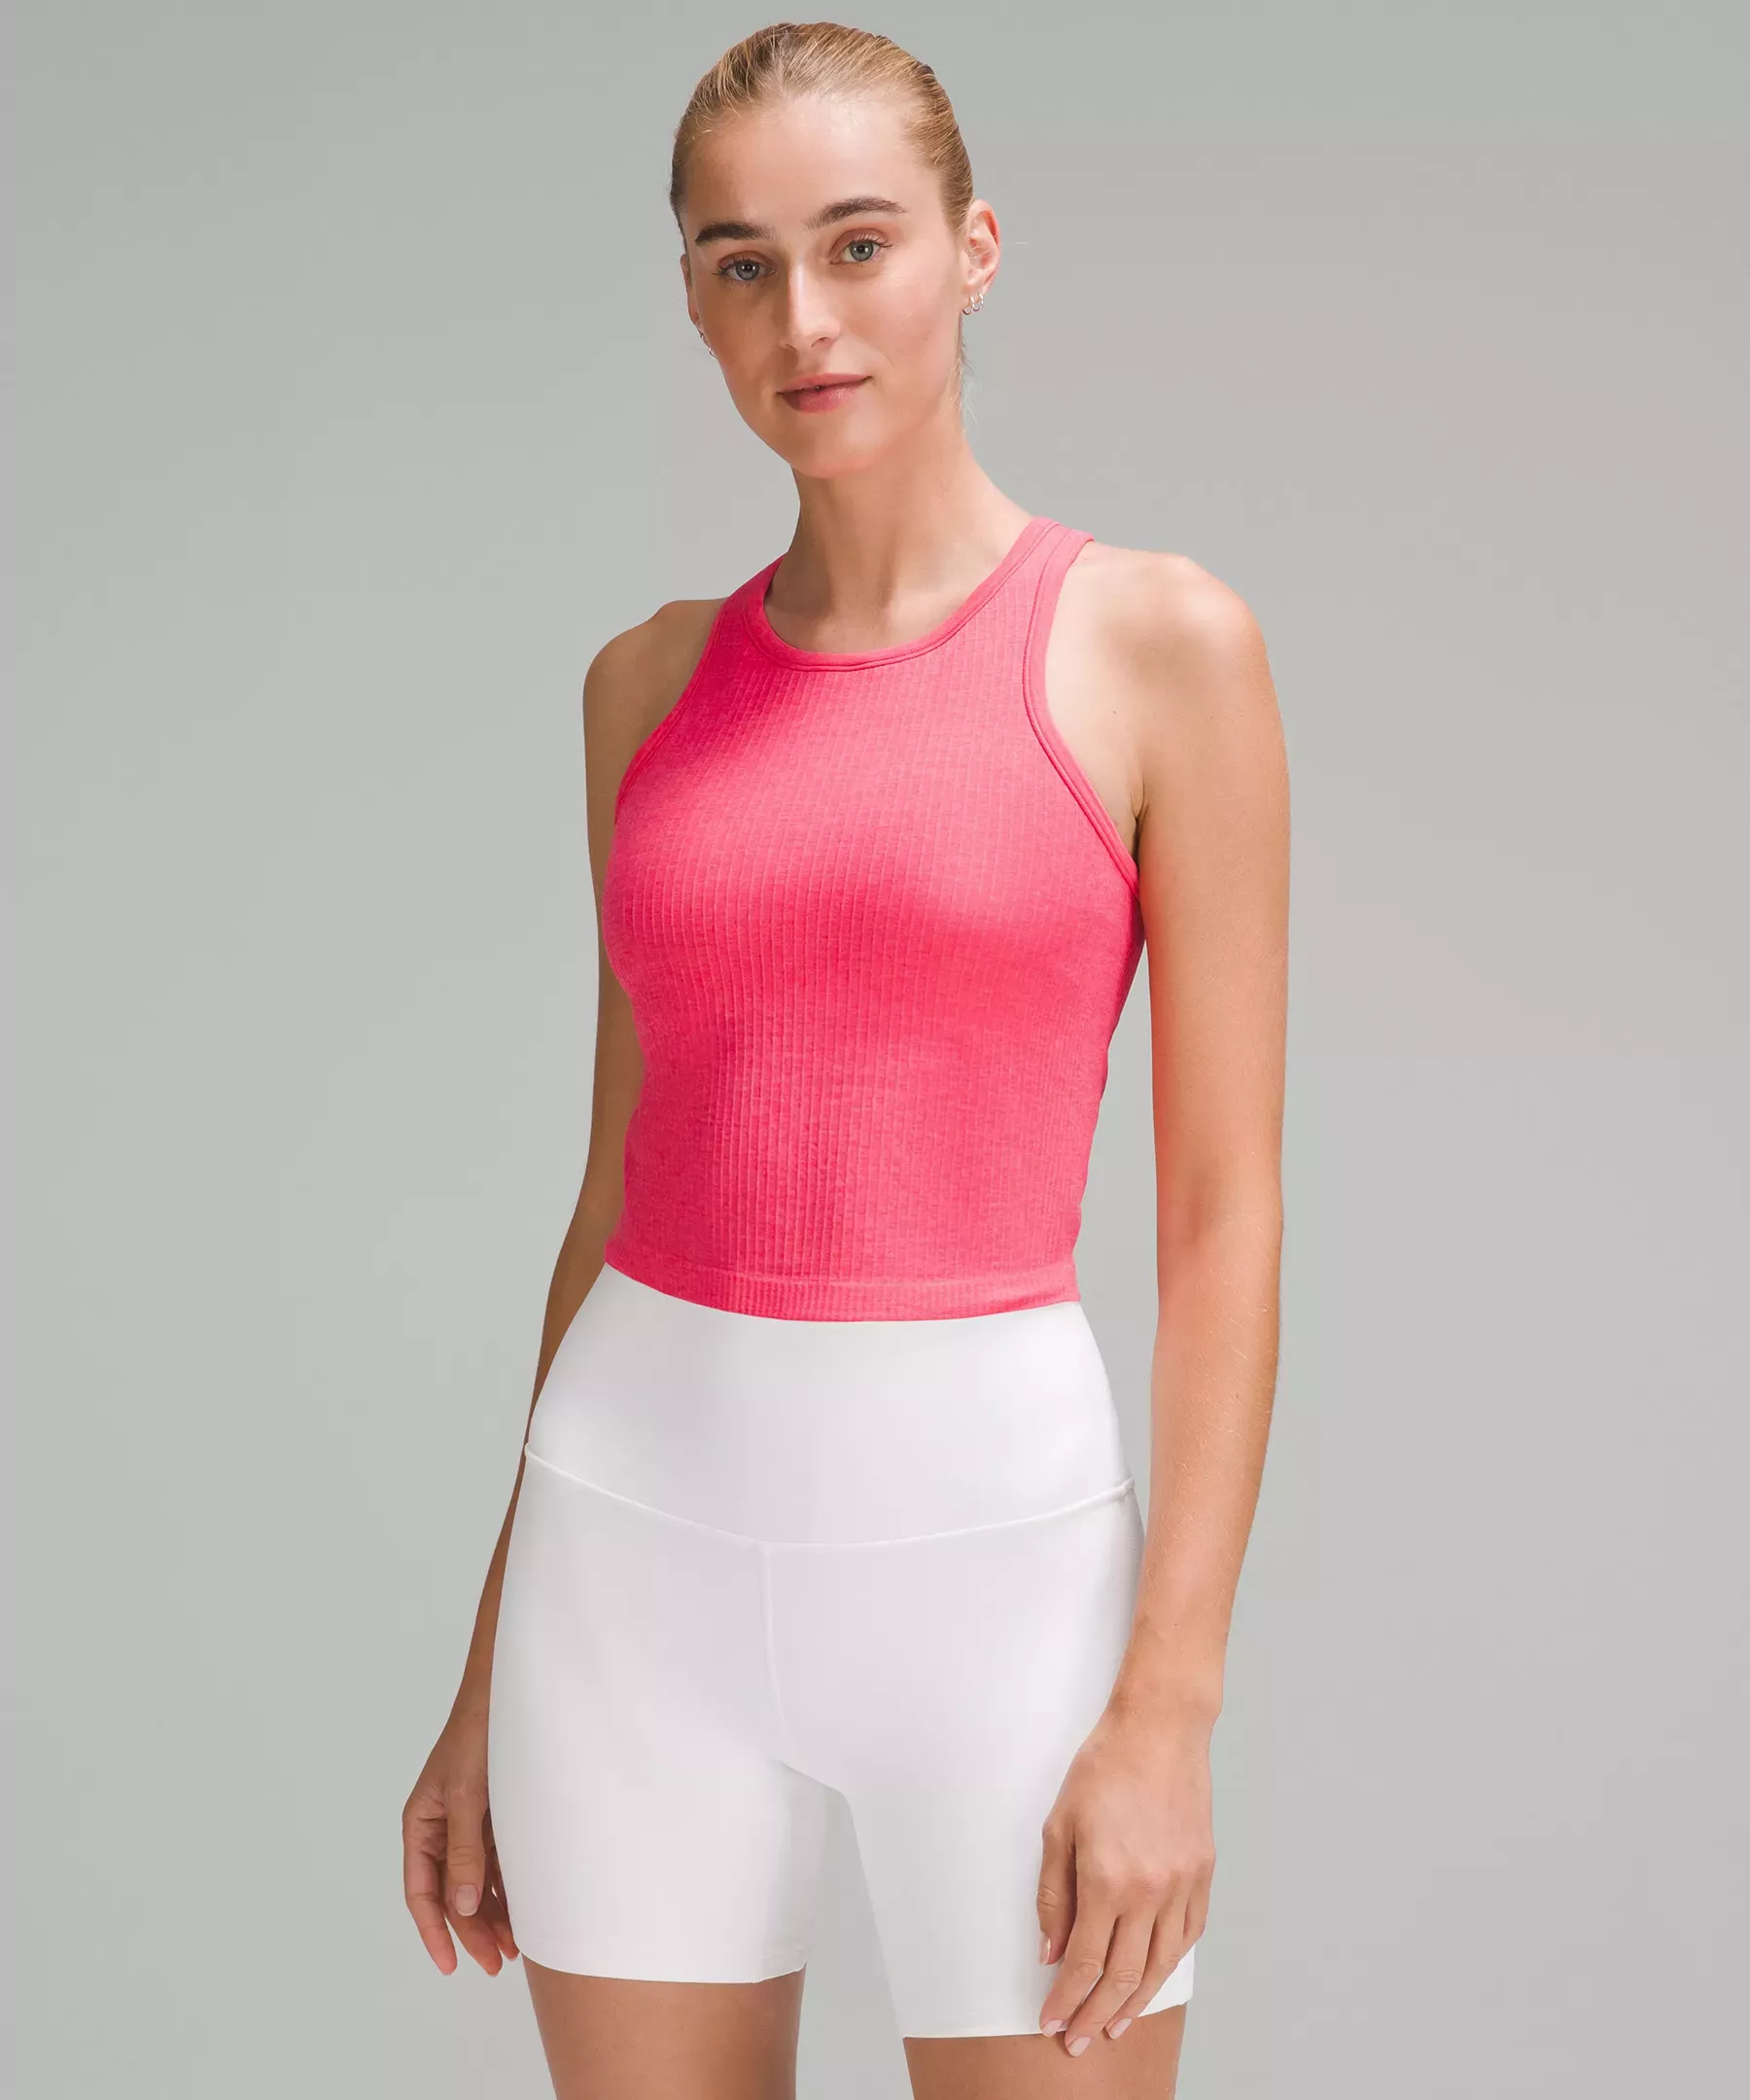 Try-On Reviews: Pleat to Street Skirt + All Sport Support Tank +